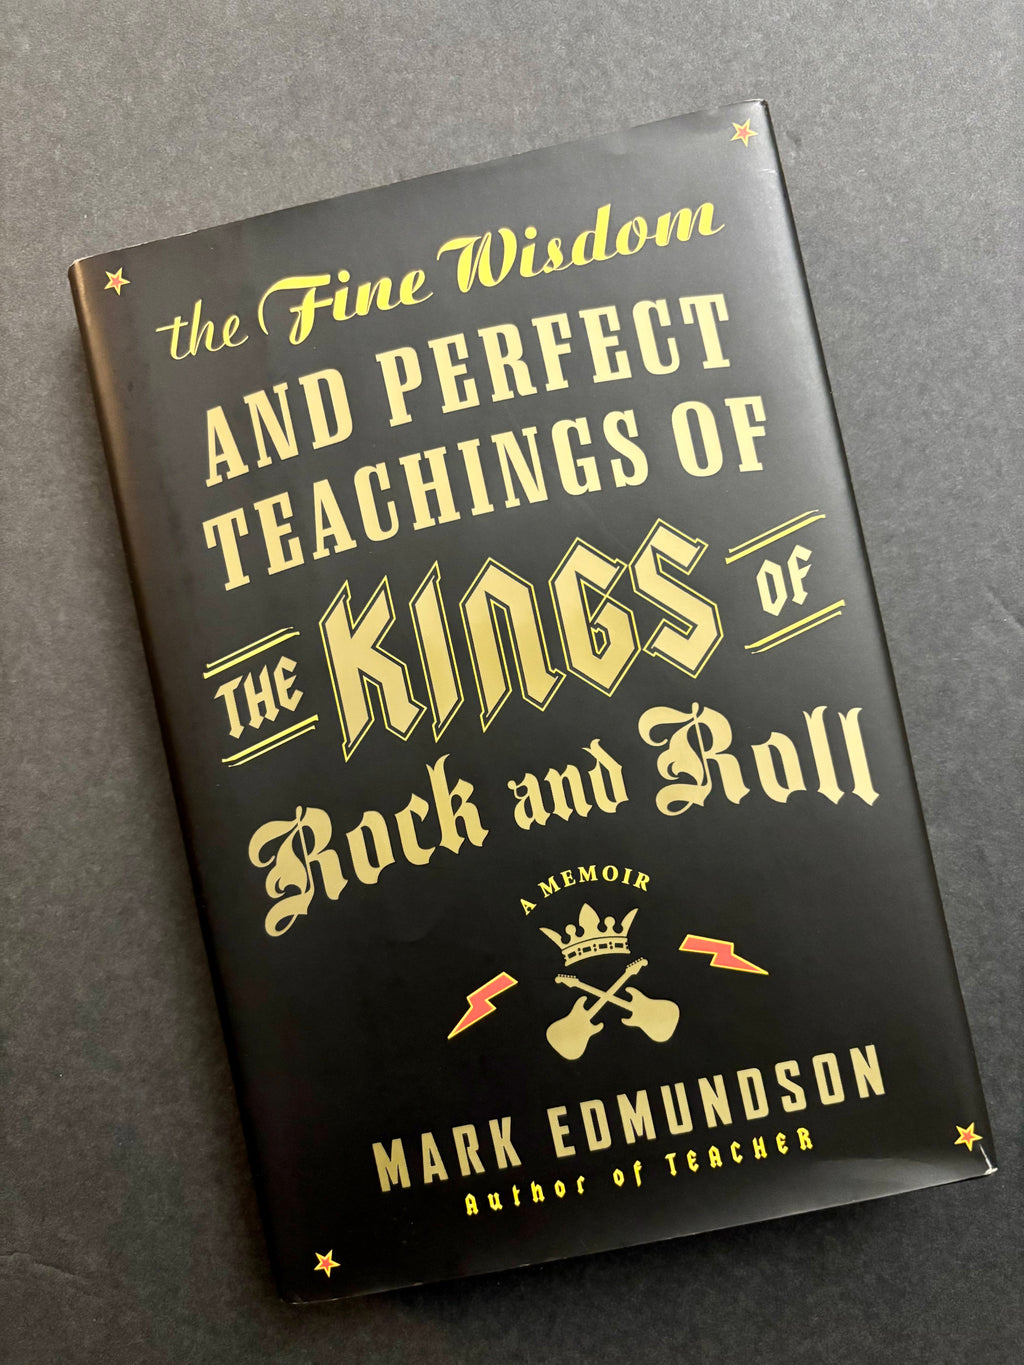 The Fine Wisdom and Perfect Teachings of the Kings of Rock and Roll- By Mark Edmundson